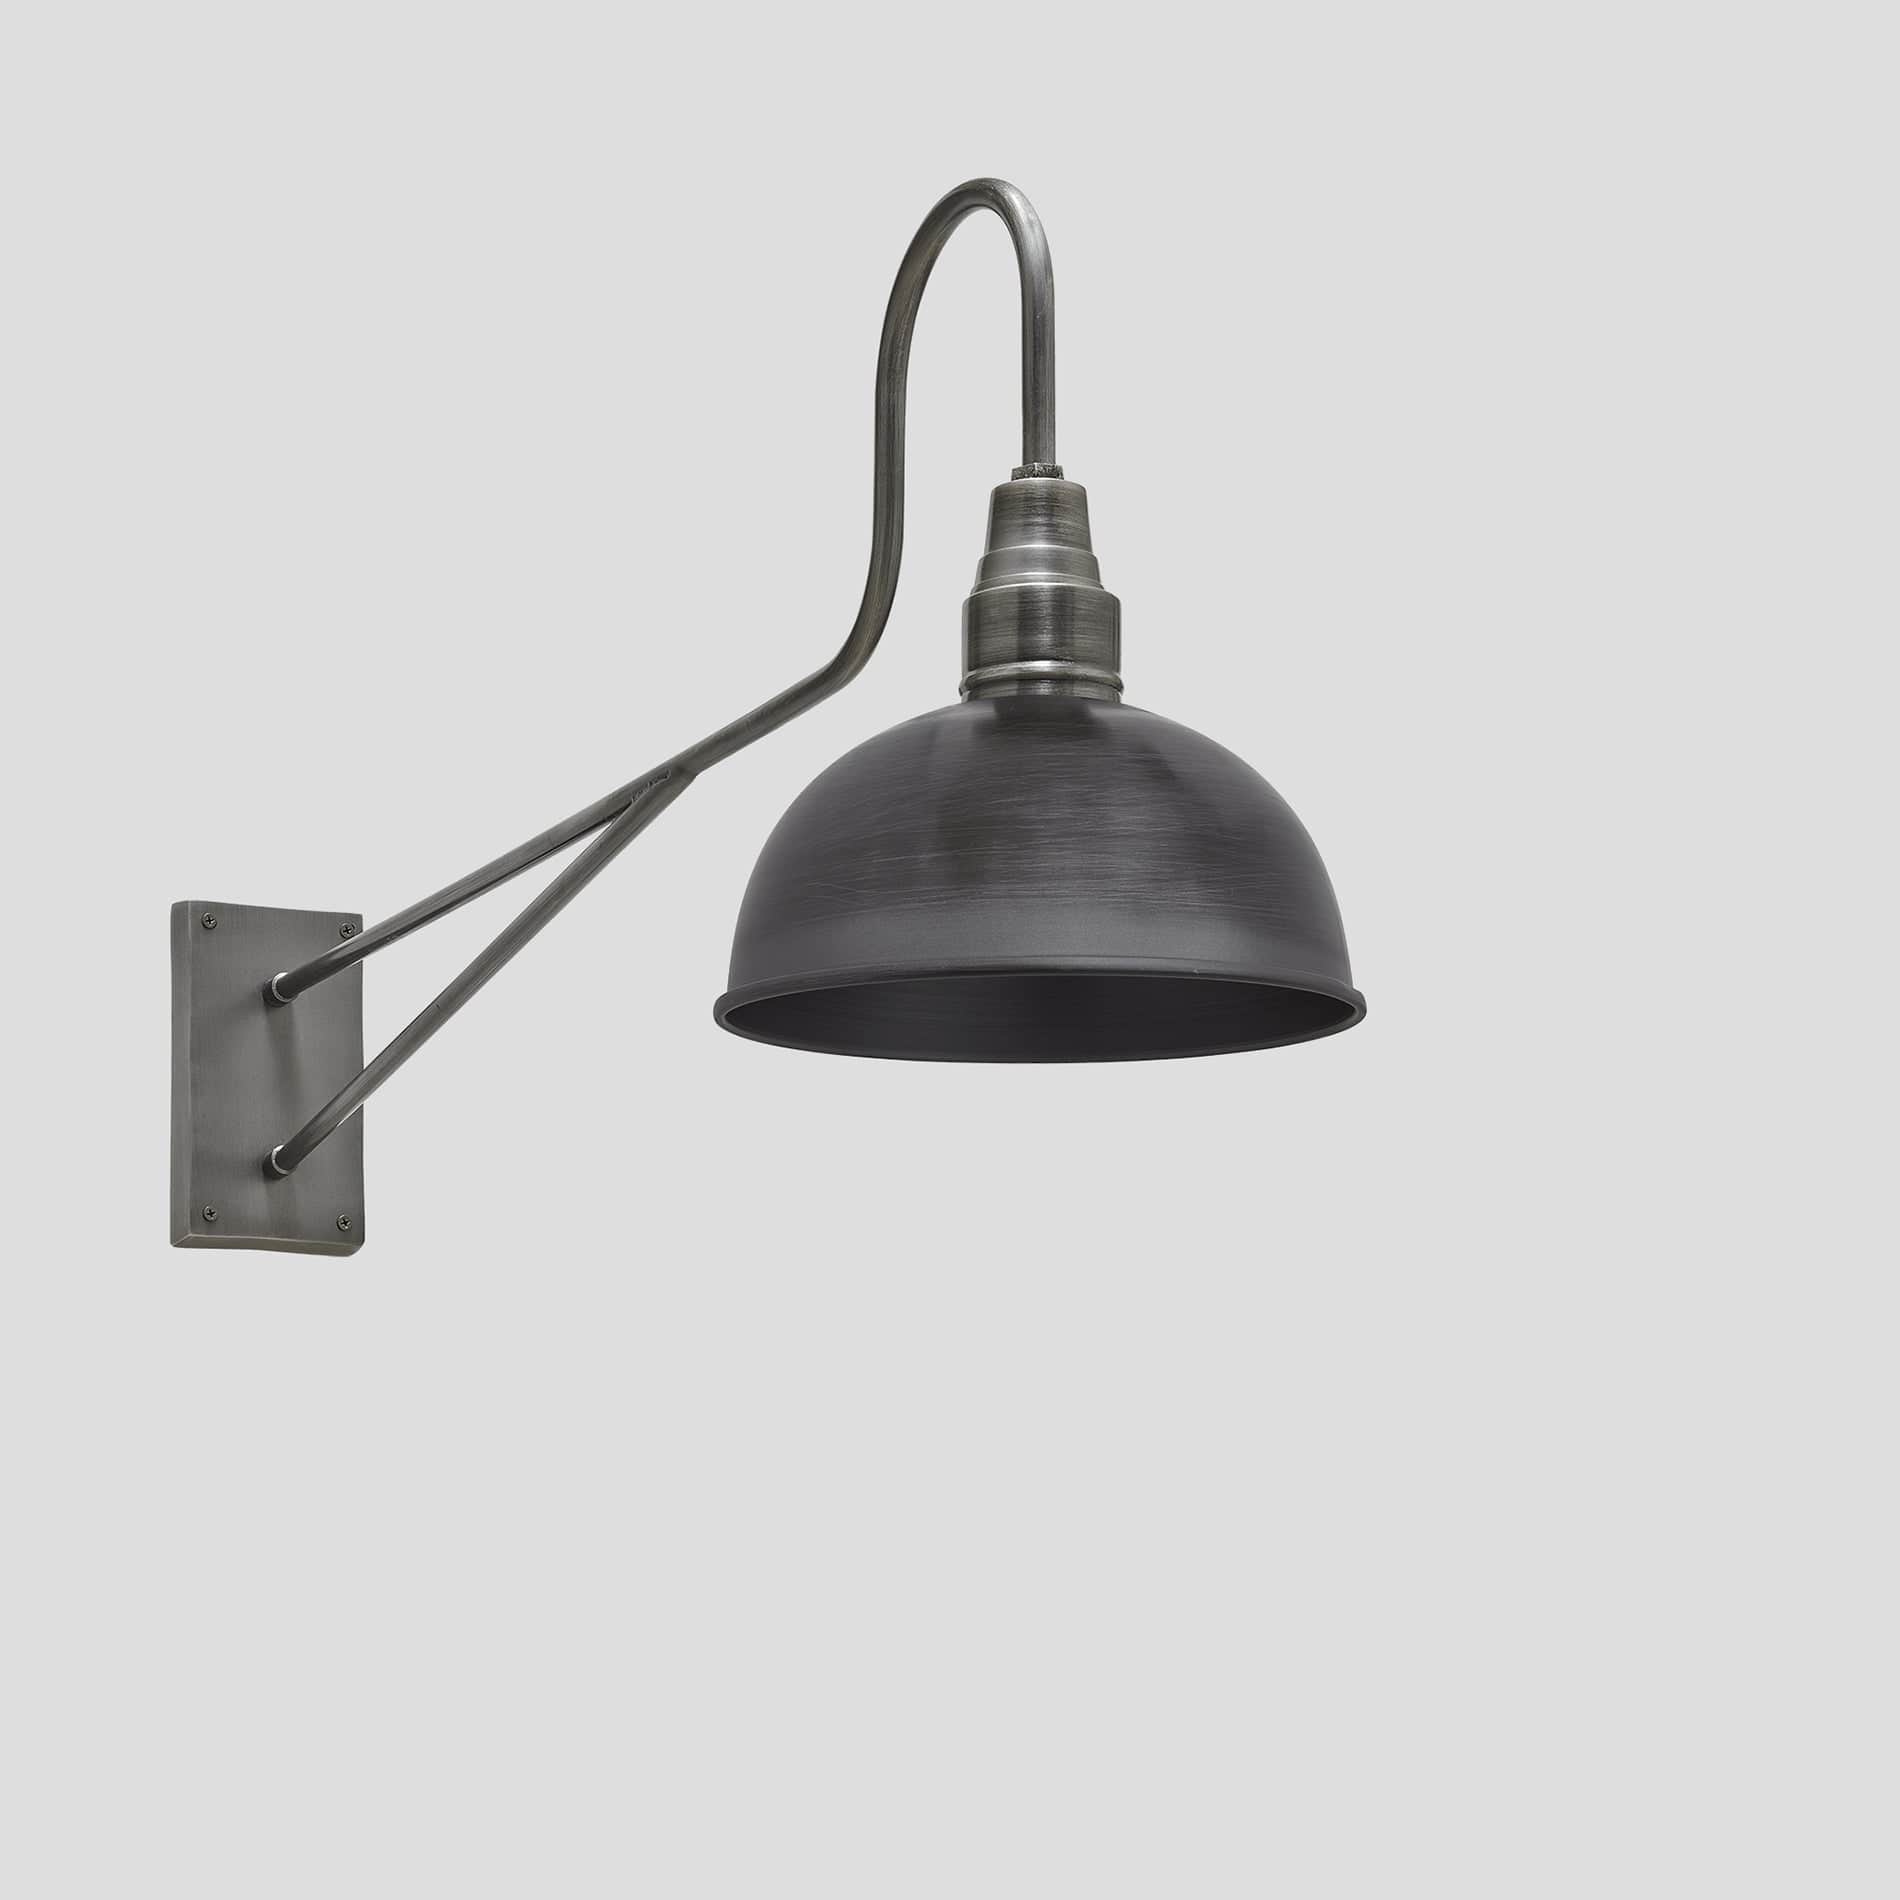 Long Arm Dome Wall Light - 8 Inch - Pewter Industville LA-DWL8-P-PH